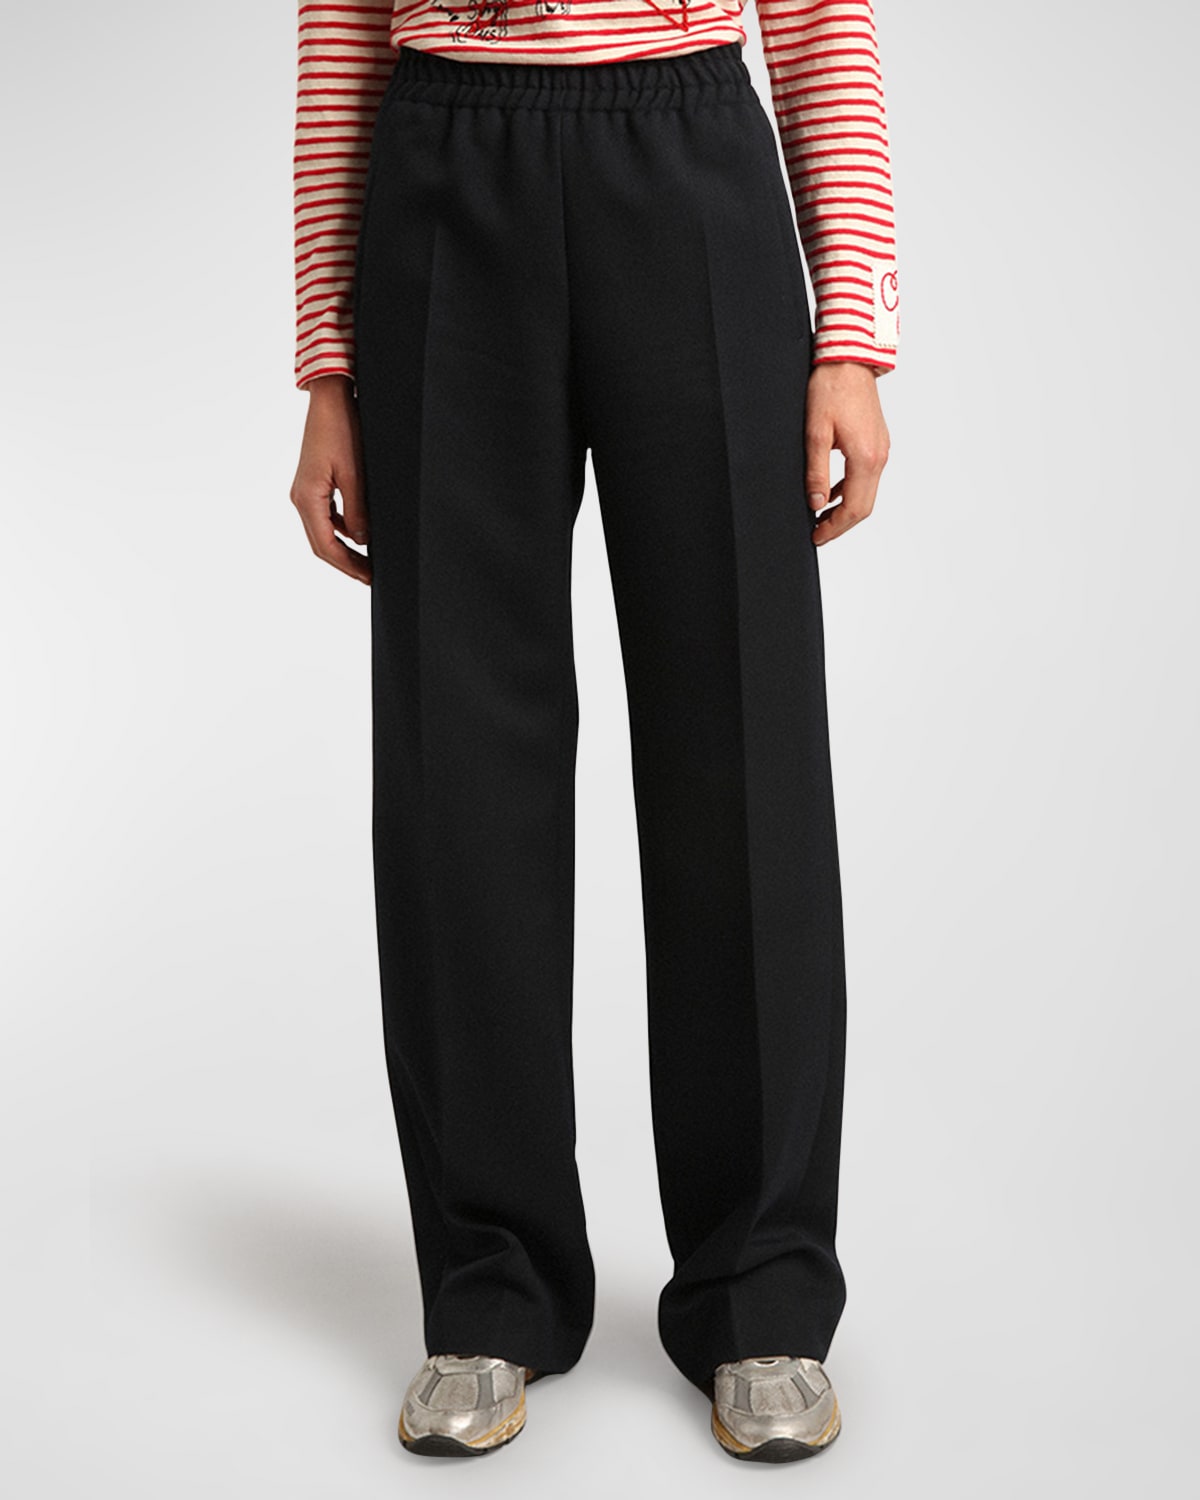 Golden Goose Star Collection Wide-Leg Track Pants | Neiman Marcus